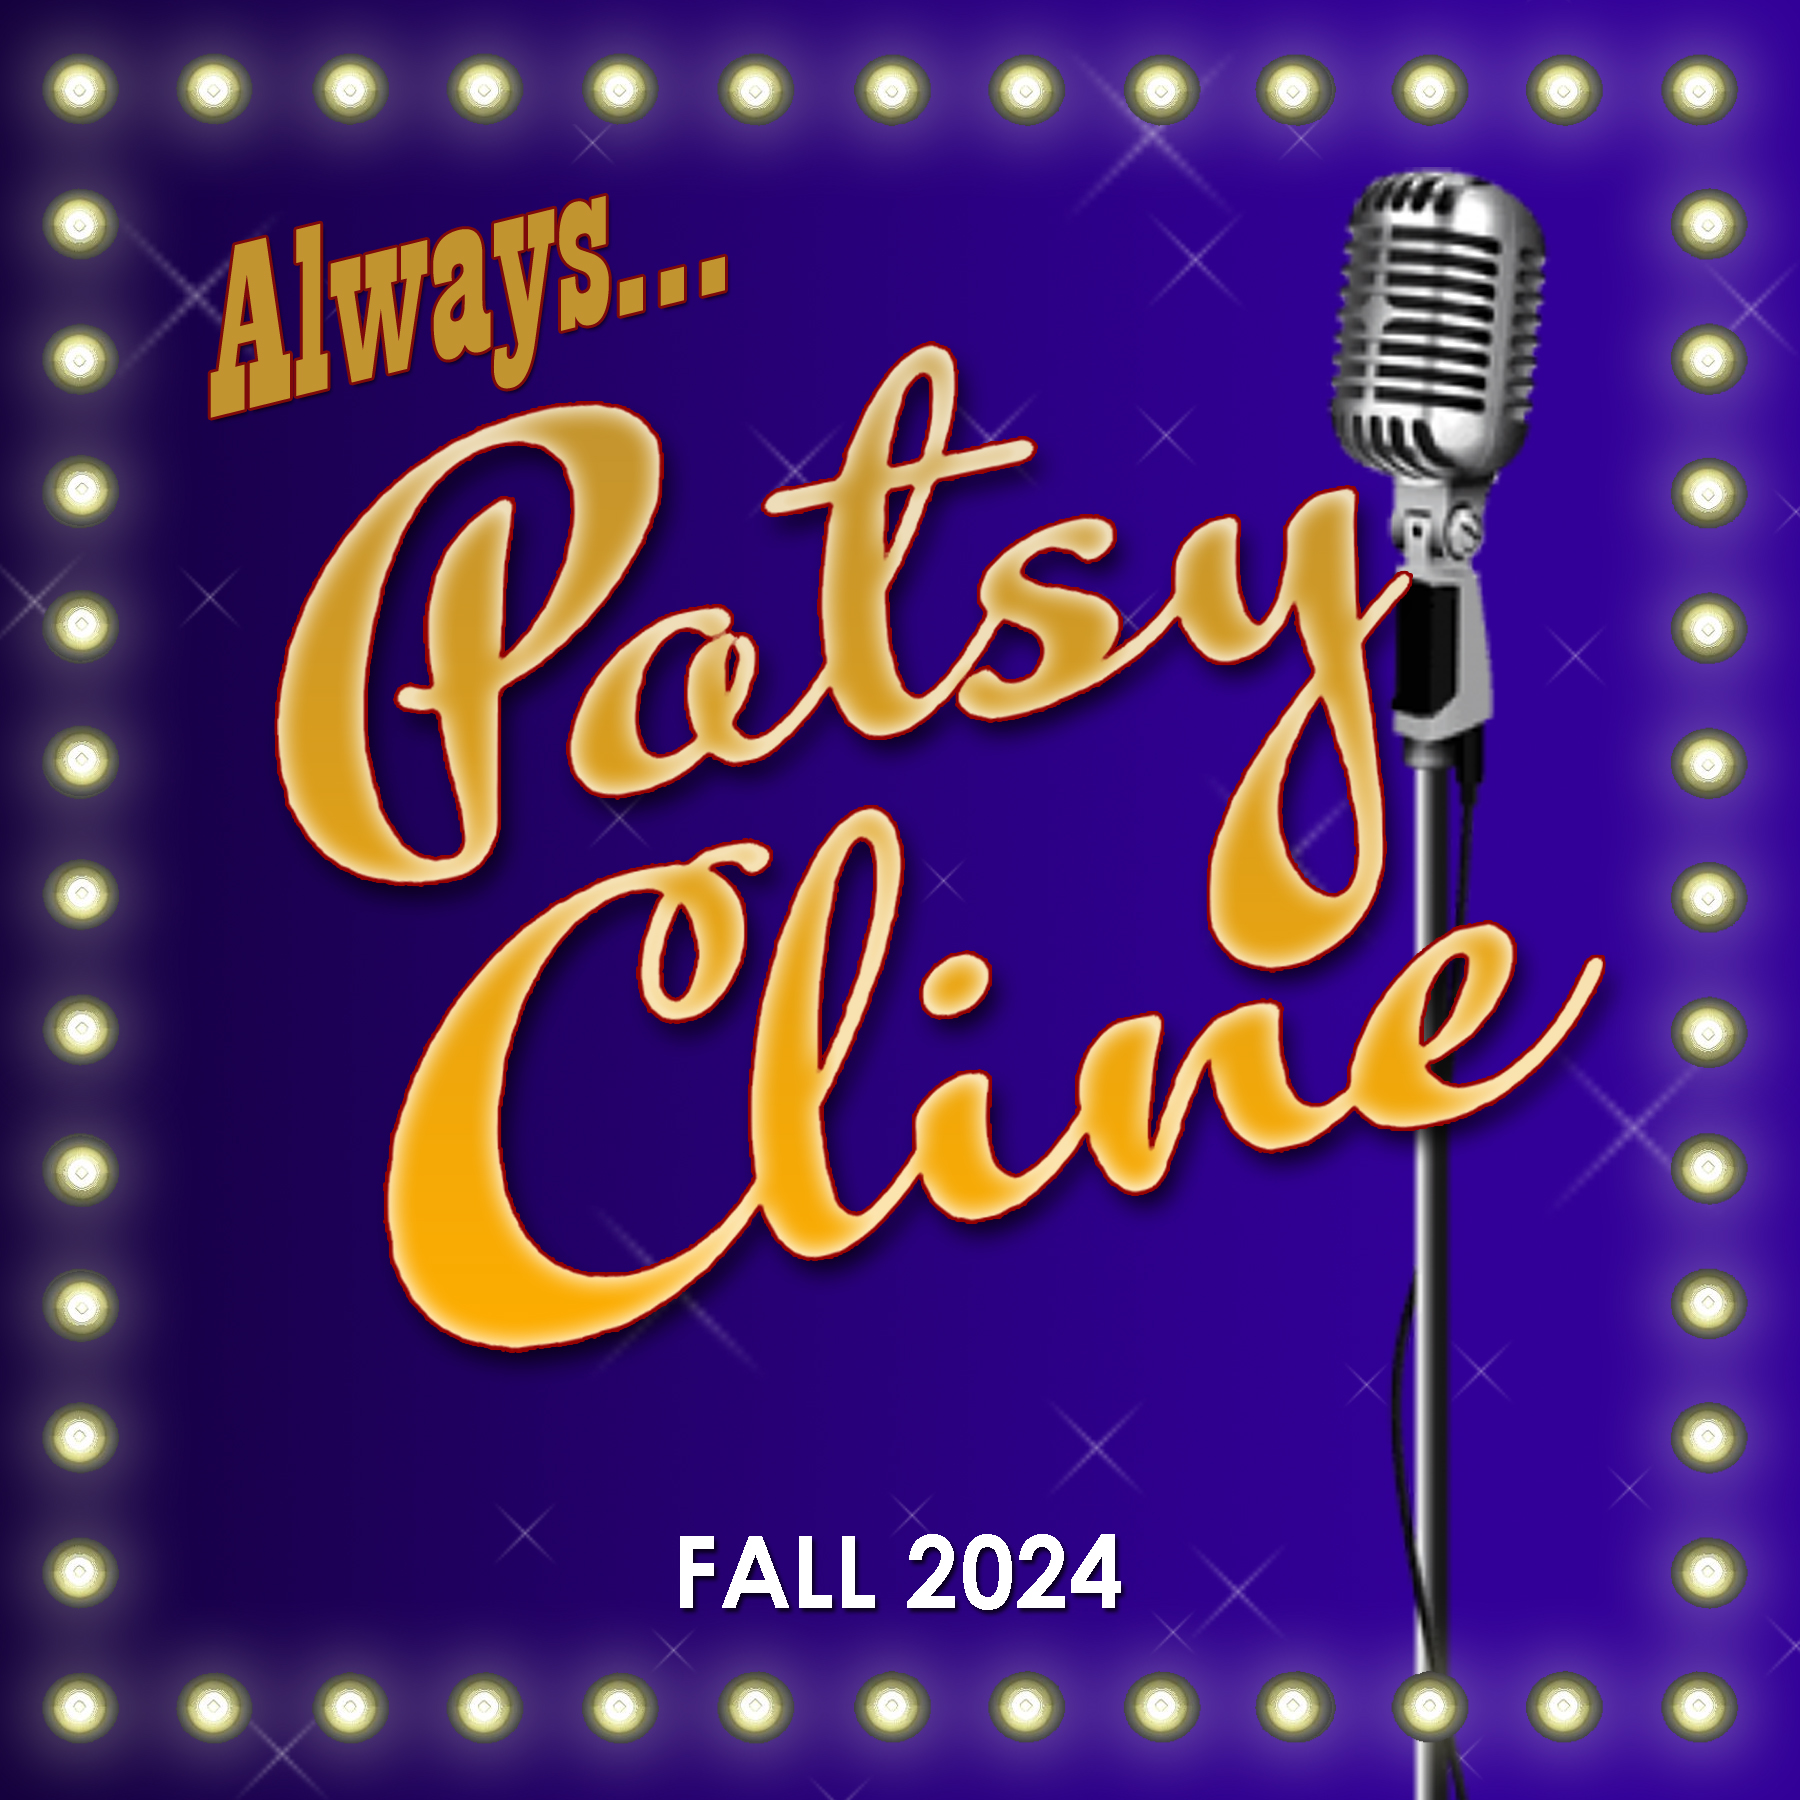 Always...Patsy Cline at the Pines Dinner Theatre